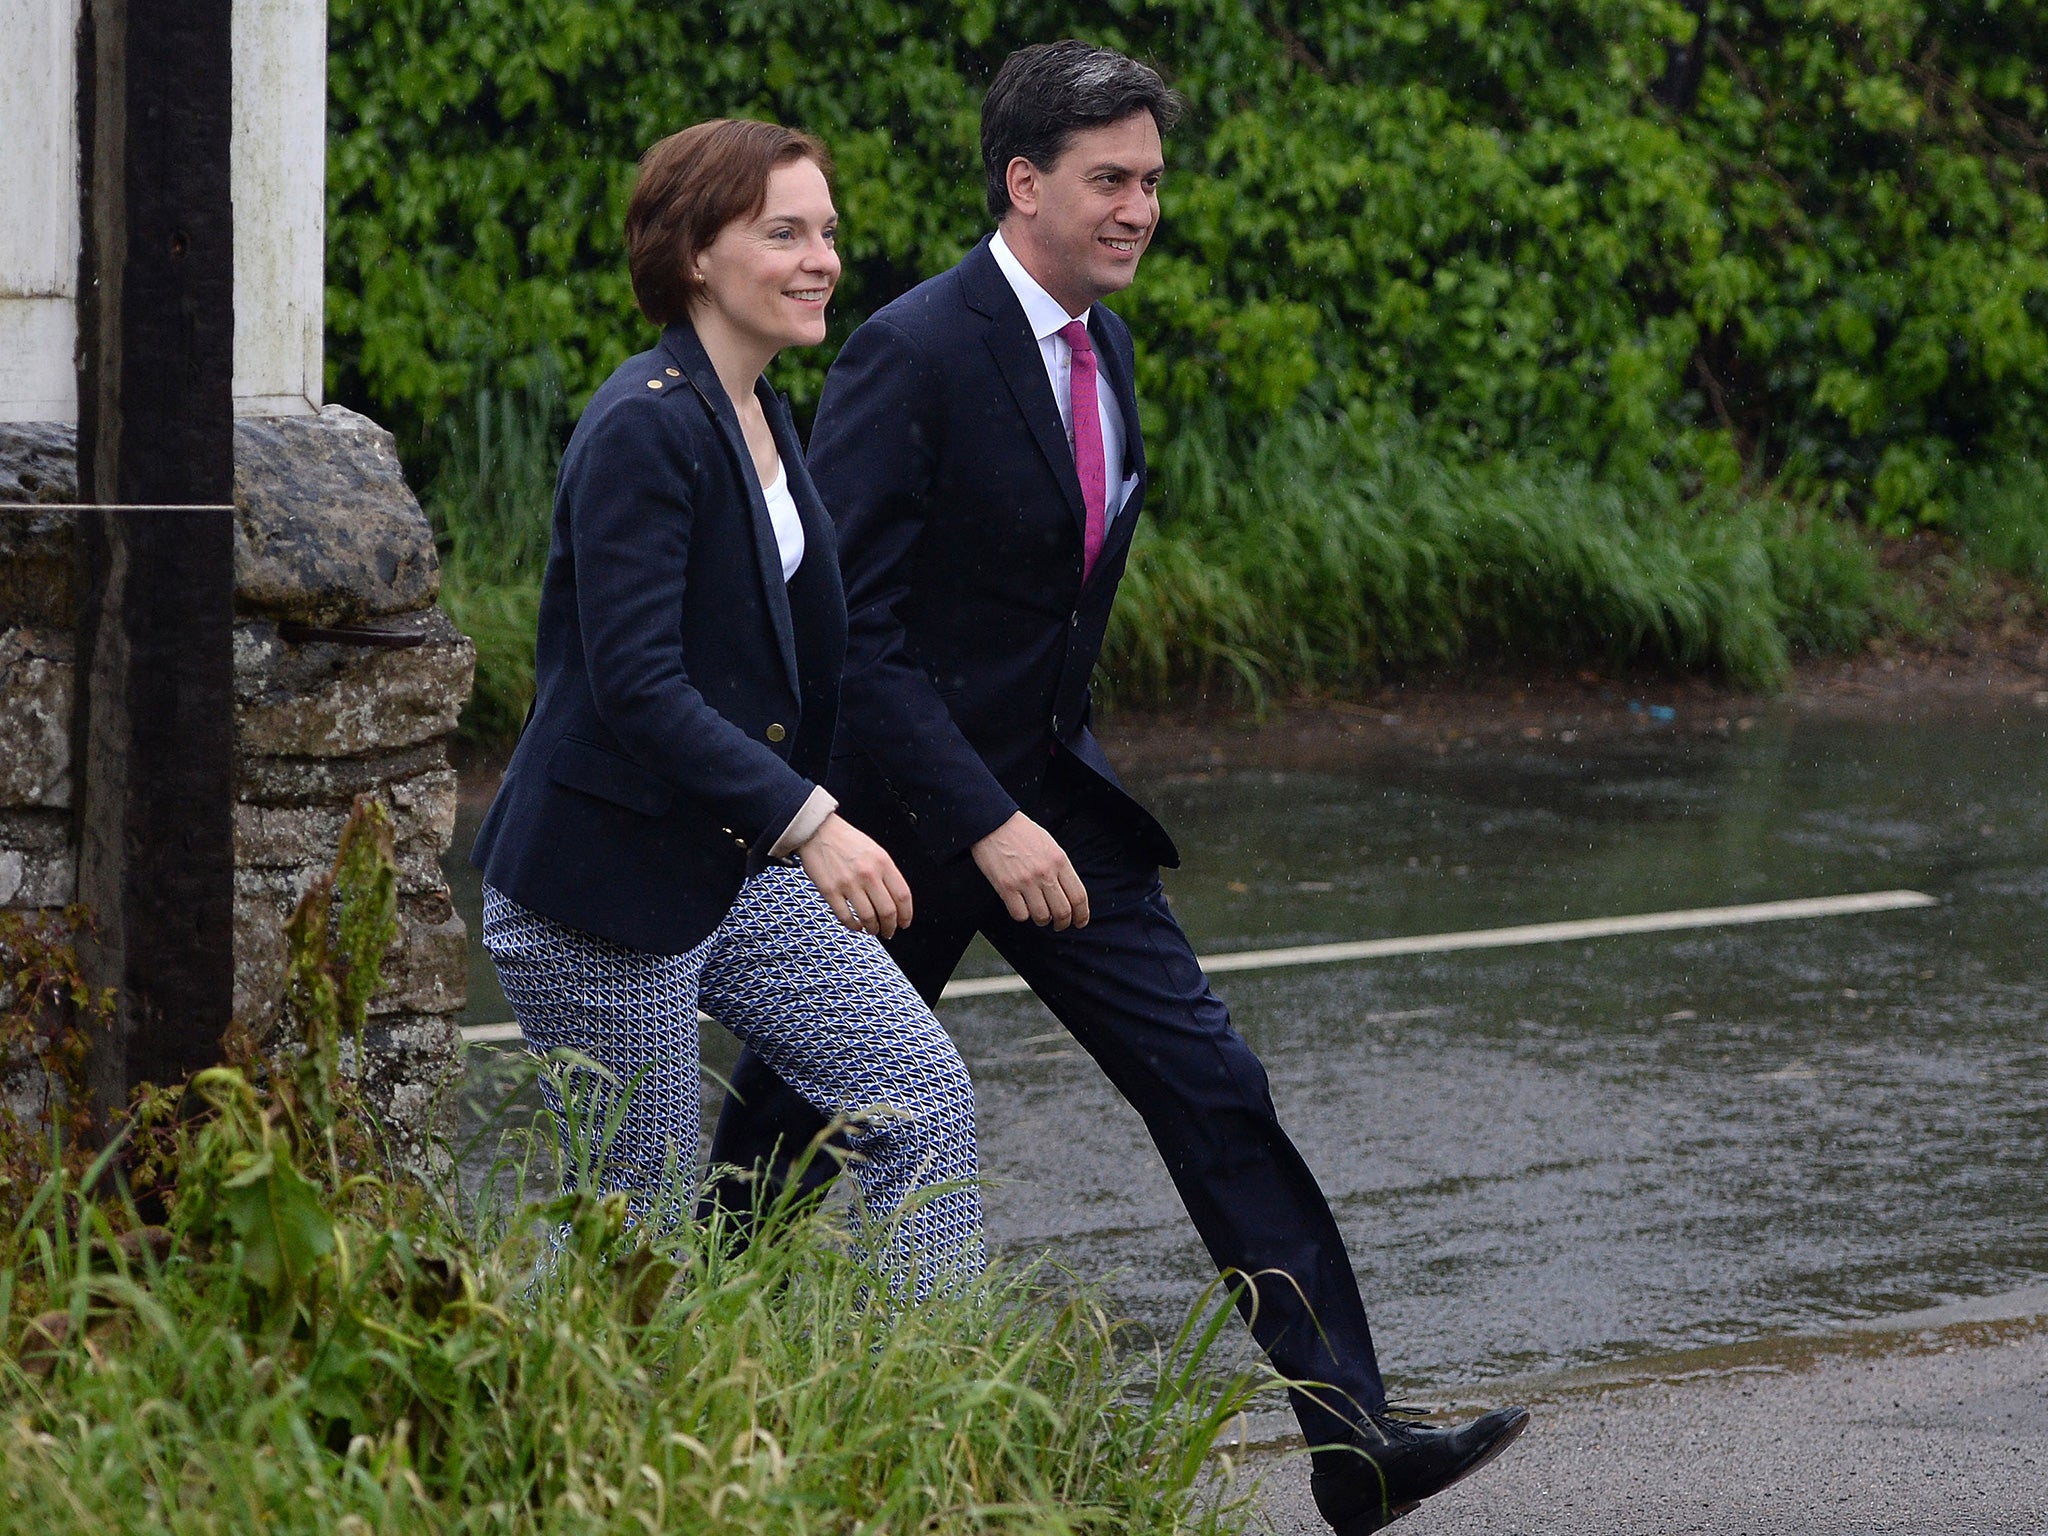 The Labour leader Ed Miliband and his wife Justine, who has been campaigning in his support